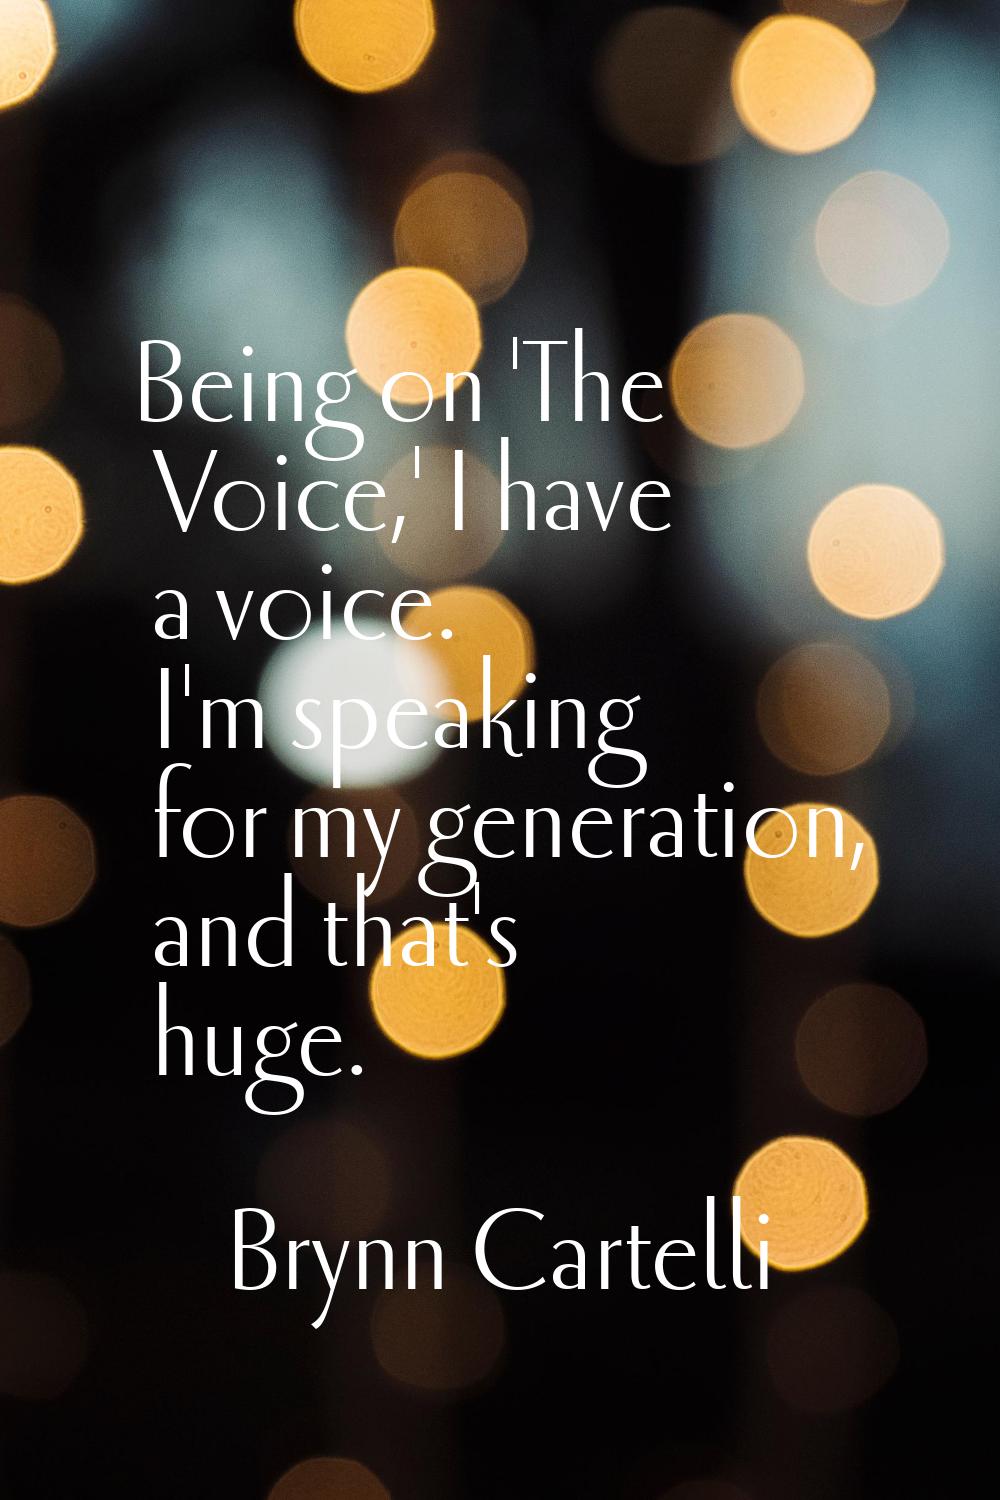 Being on 'The Voice,' I have a voice. I'm speaking for my generation, and that's huge.